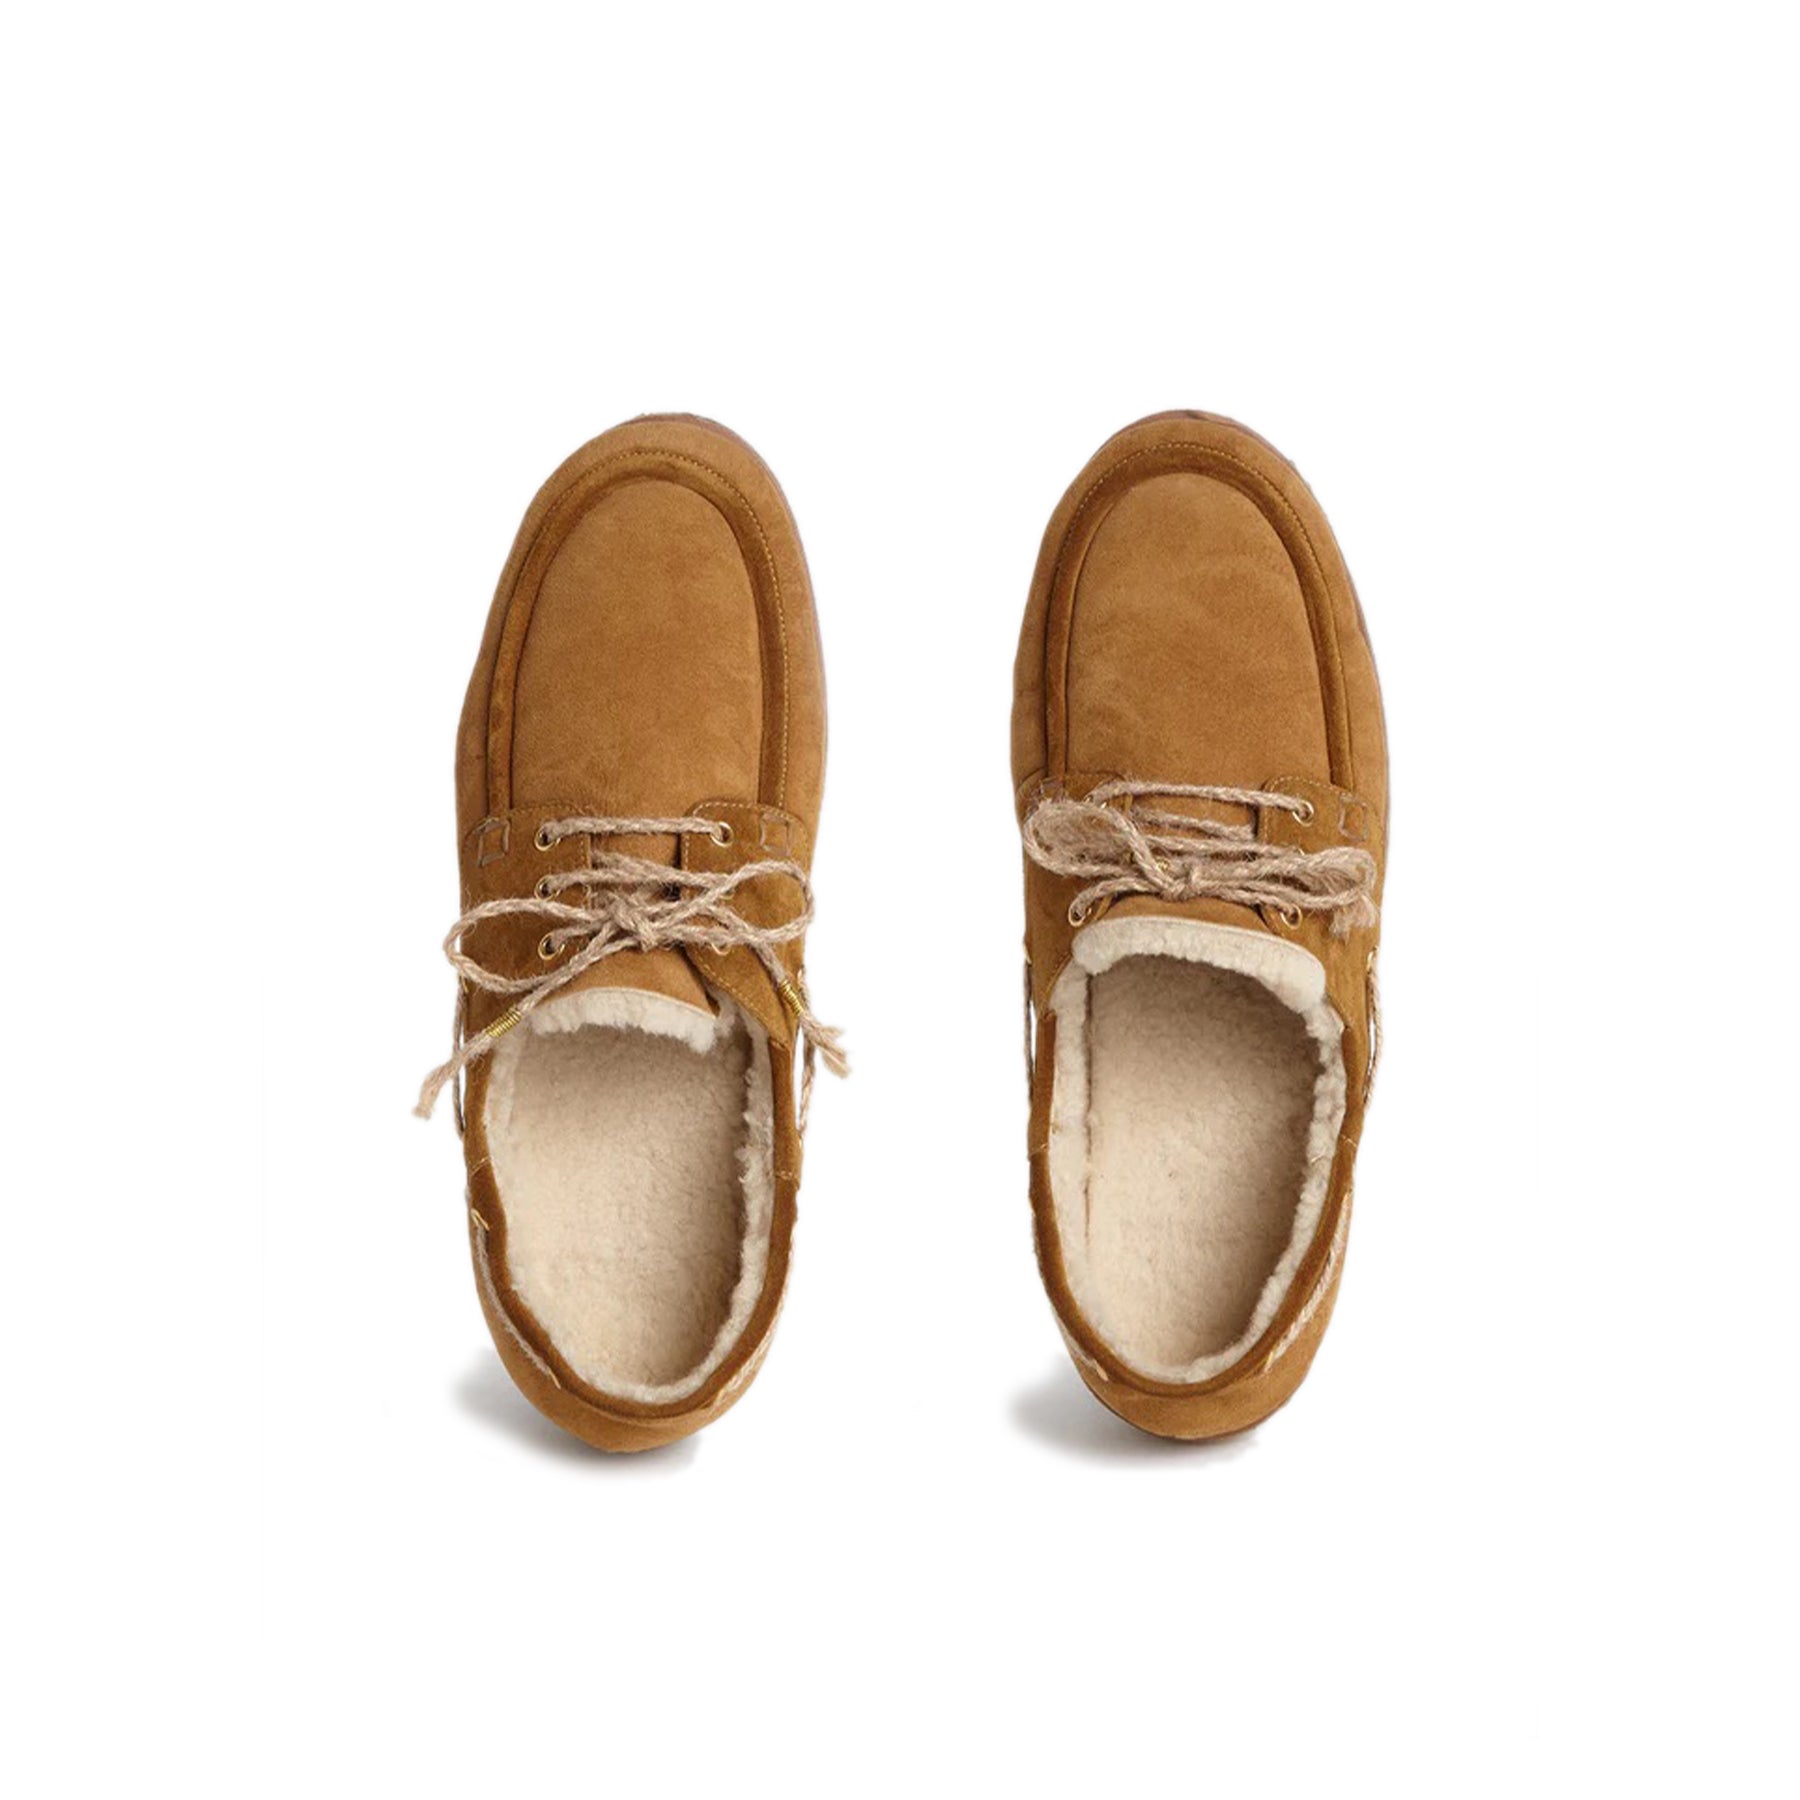 Shearling Boat Shoe - Tan Trim Fur lambskin boat shoes featuring tan trim Gold-tone eyelets Rope shoe laces with gold-tone embellishments Shearling lining Rubber sole Country of origin: Italy